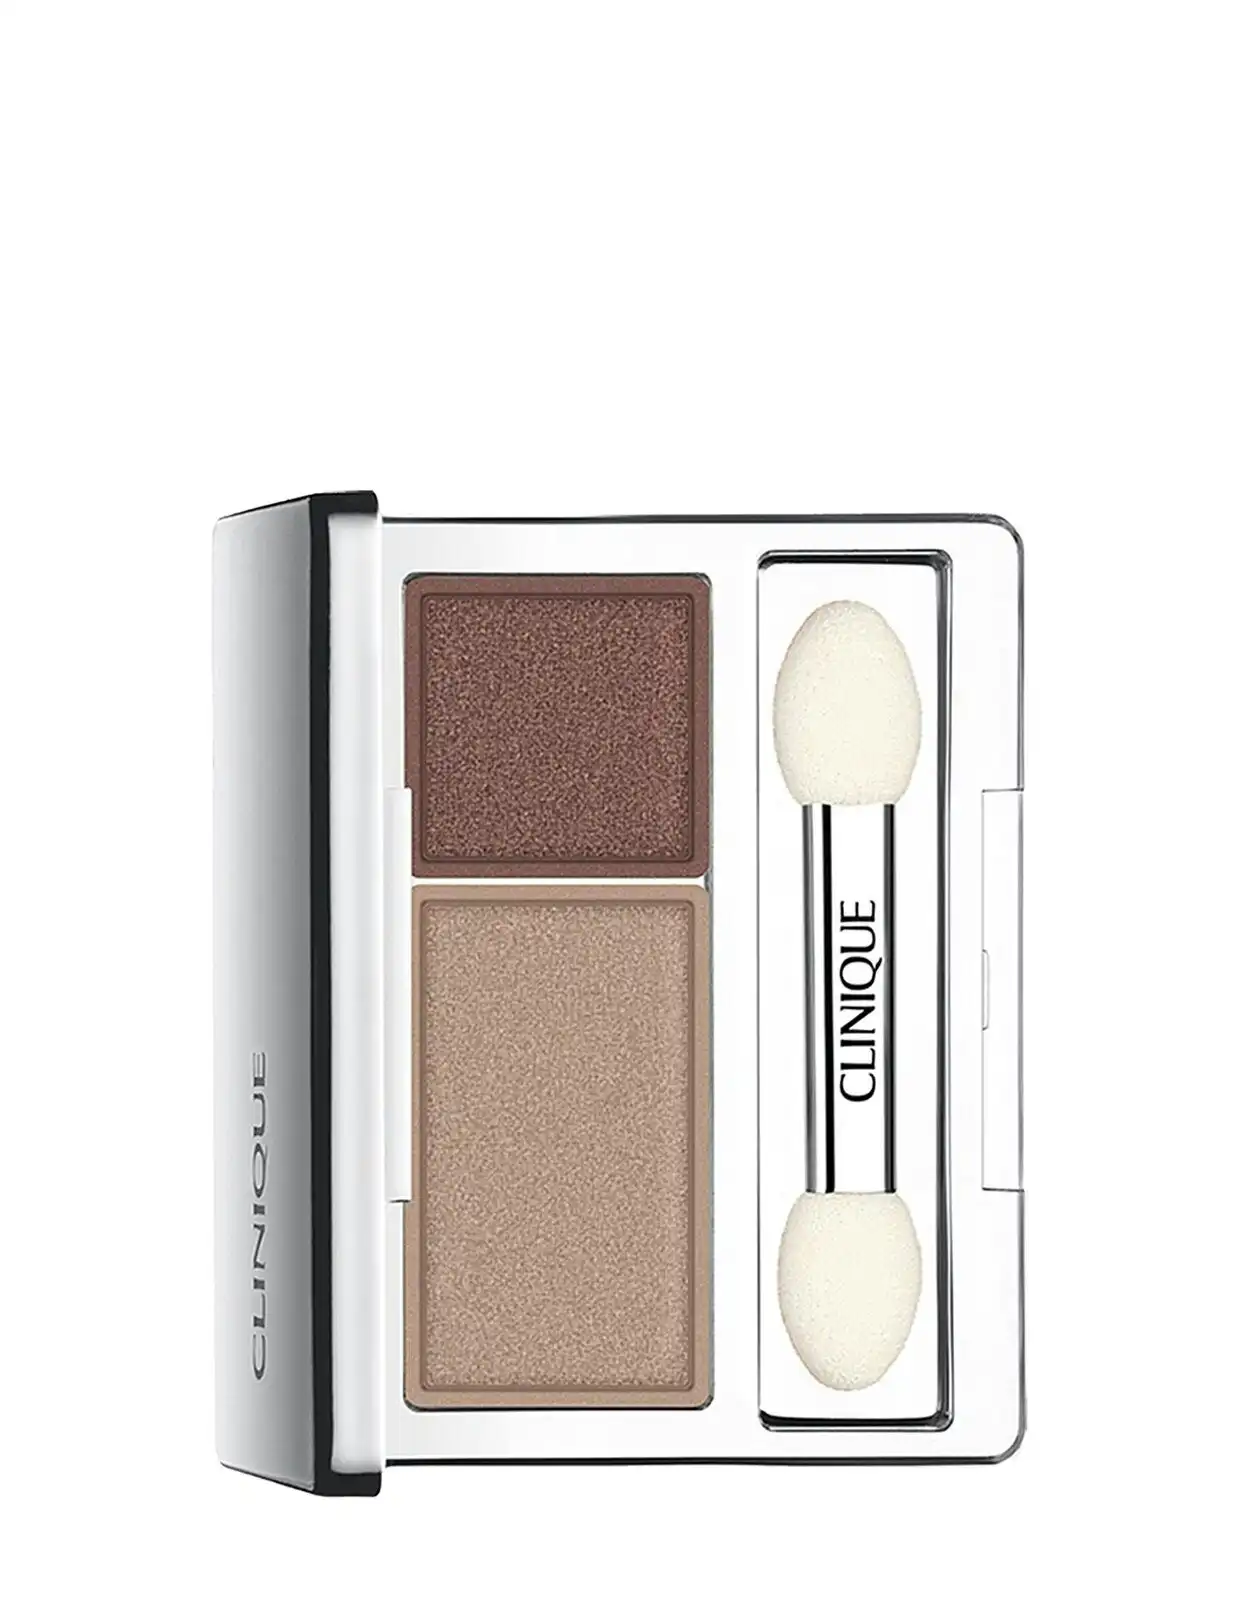 Clinique All About Shadow Duo 04 Ivory Bisque/Bronse Satin 1.7g